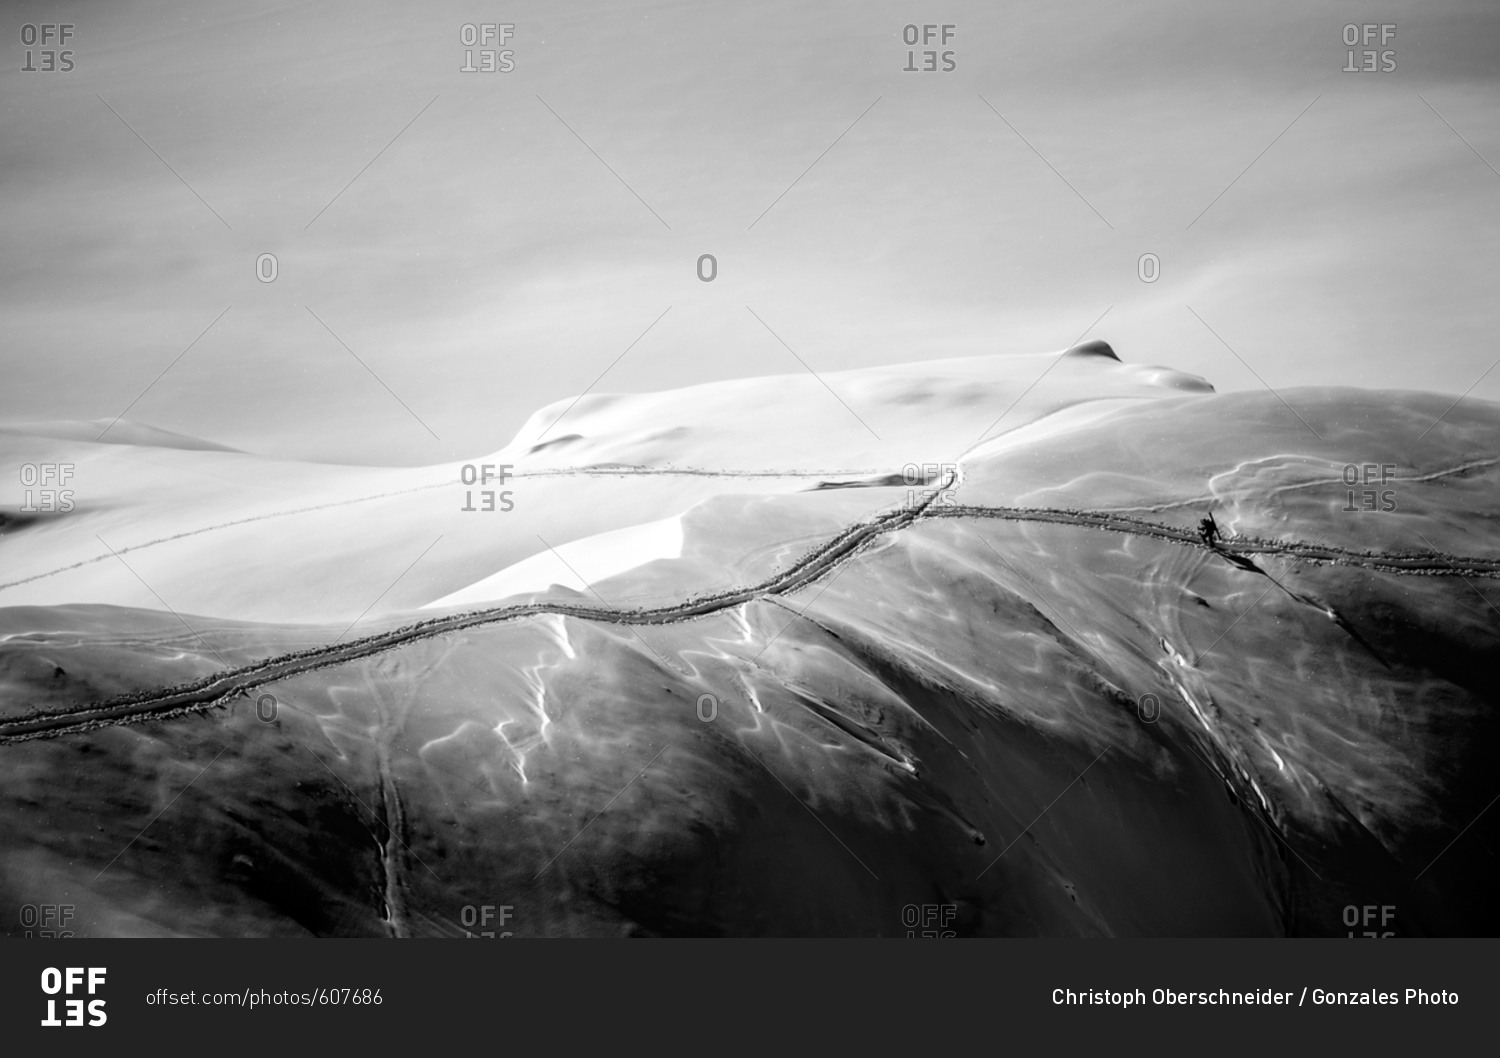 Austria, Arlberg - February 22, 2014: A breathtaking view on the Arlberg where a skier is fighting his way through the deep snow. The mountain range is located between Vorarlberg and Tyrol